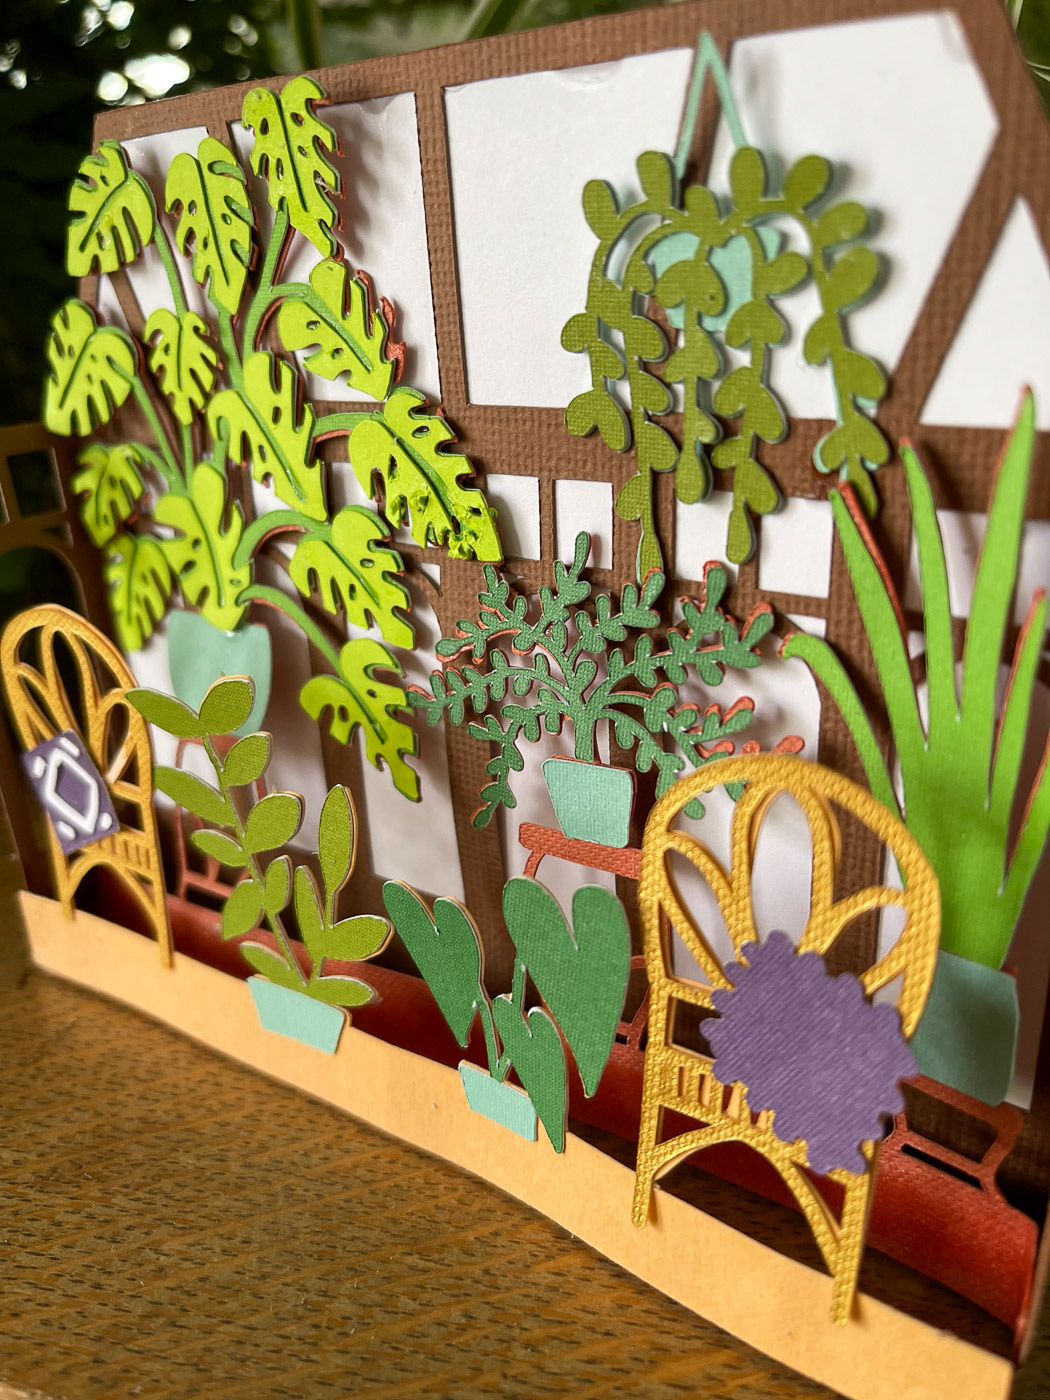 Right side view showing the layers of a 3D Paper Card of houseplants in a sunroom sitting near real plants